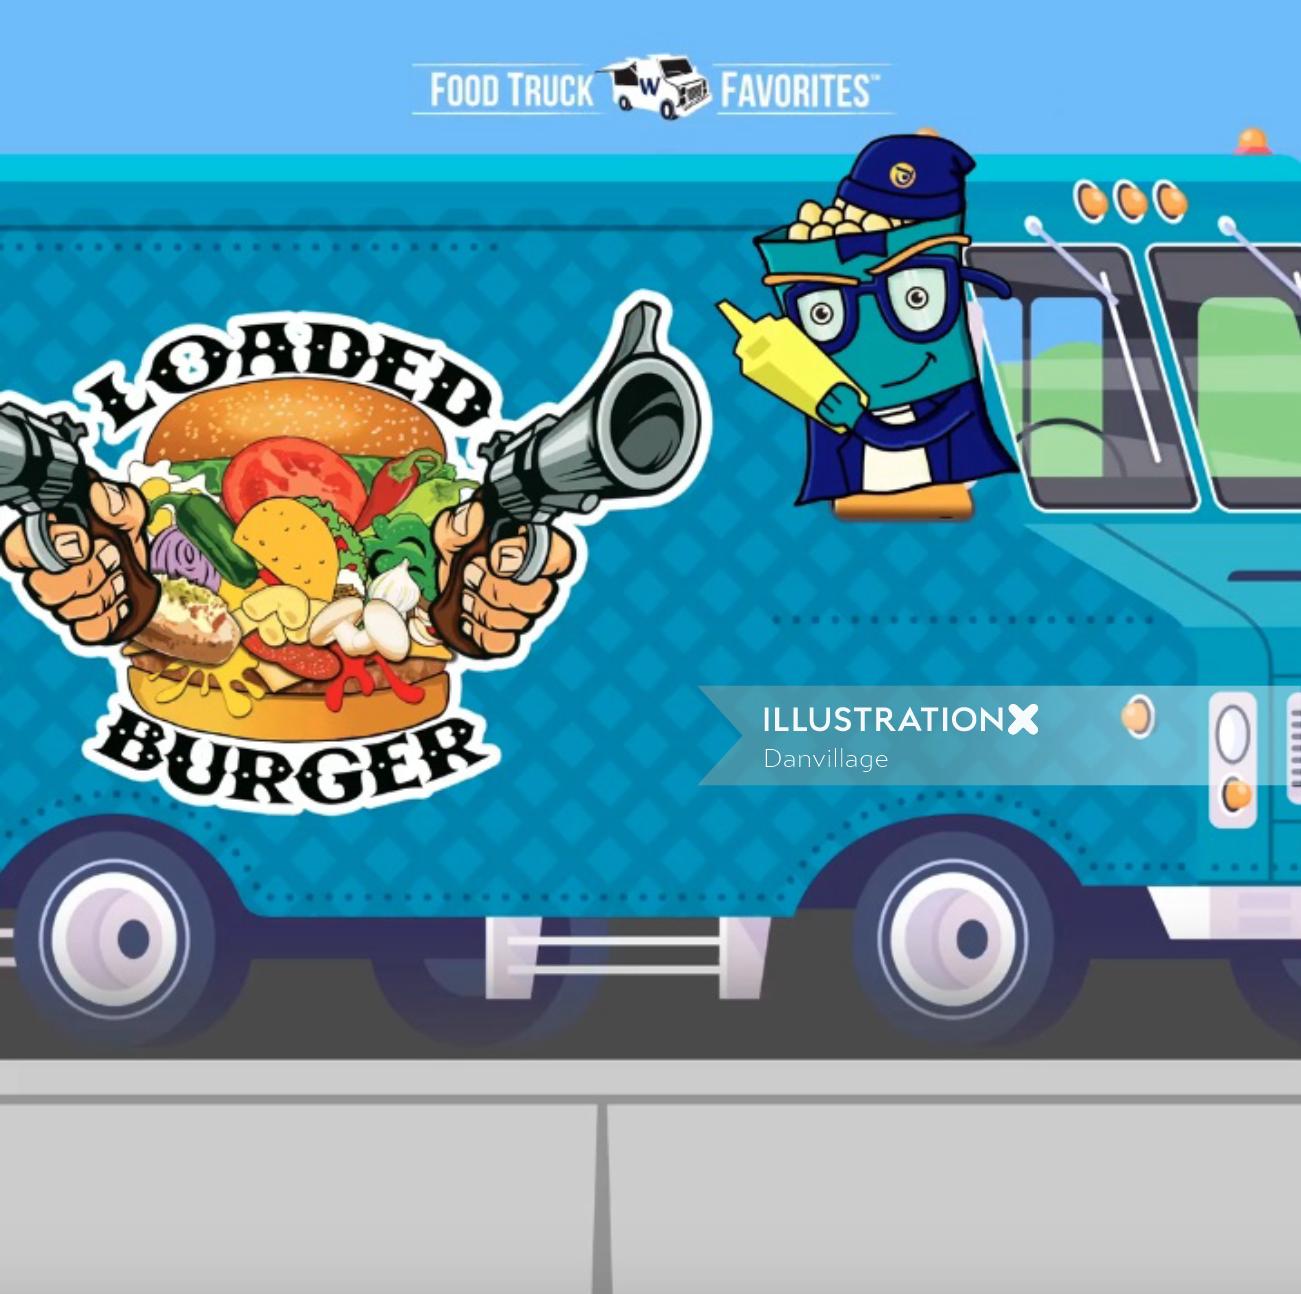 party logo of a burger food truck party logo designs for a food truck